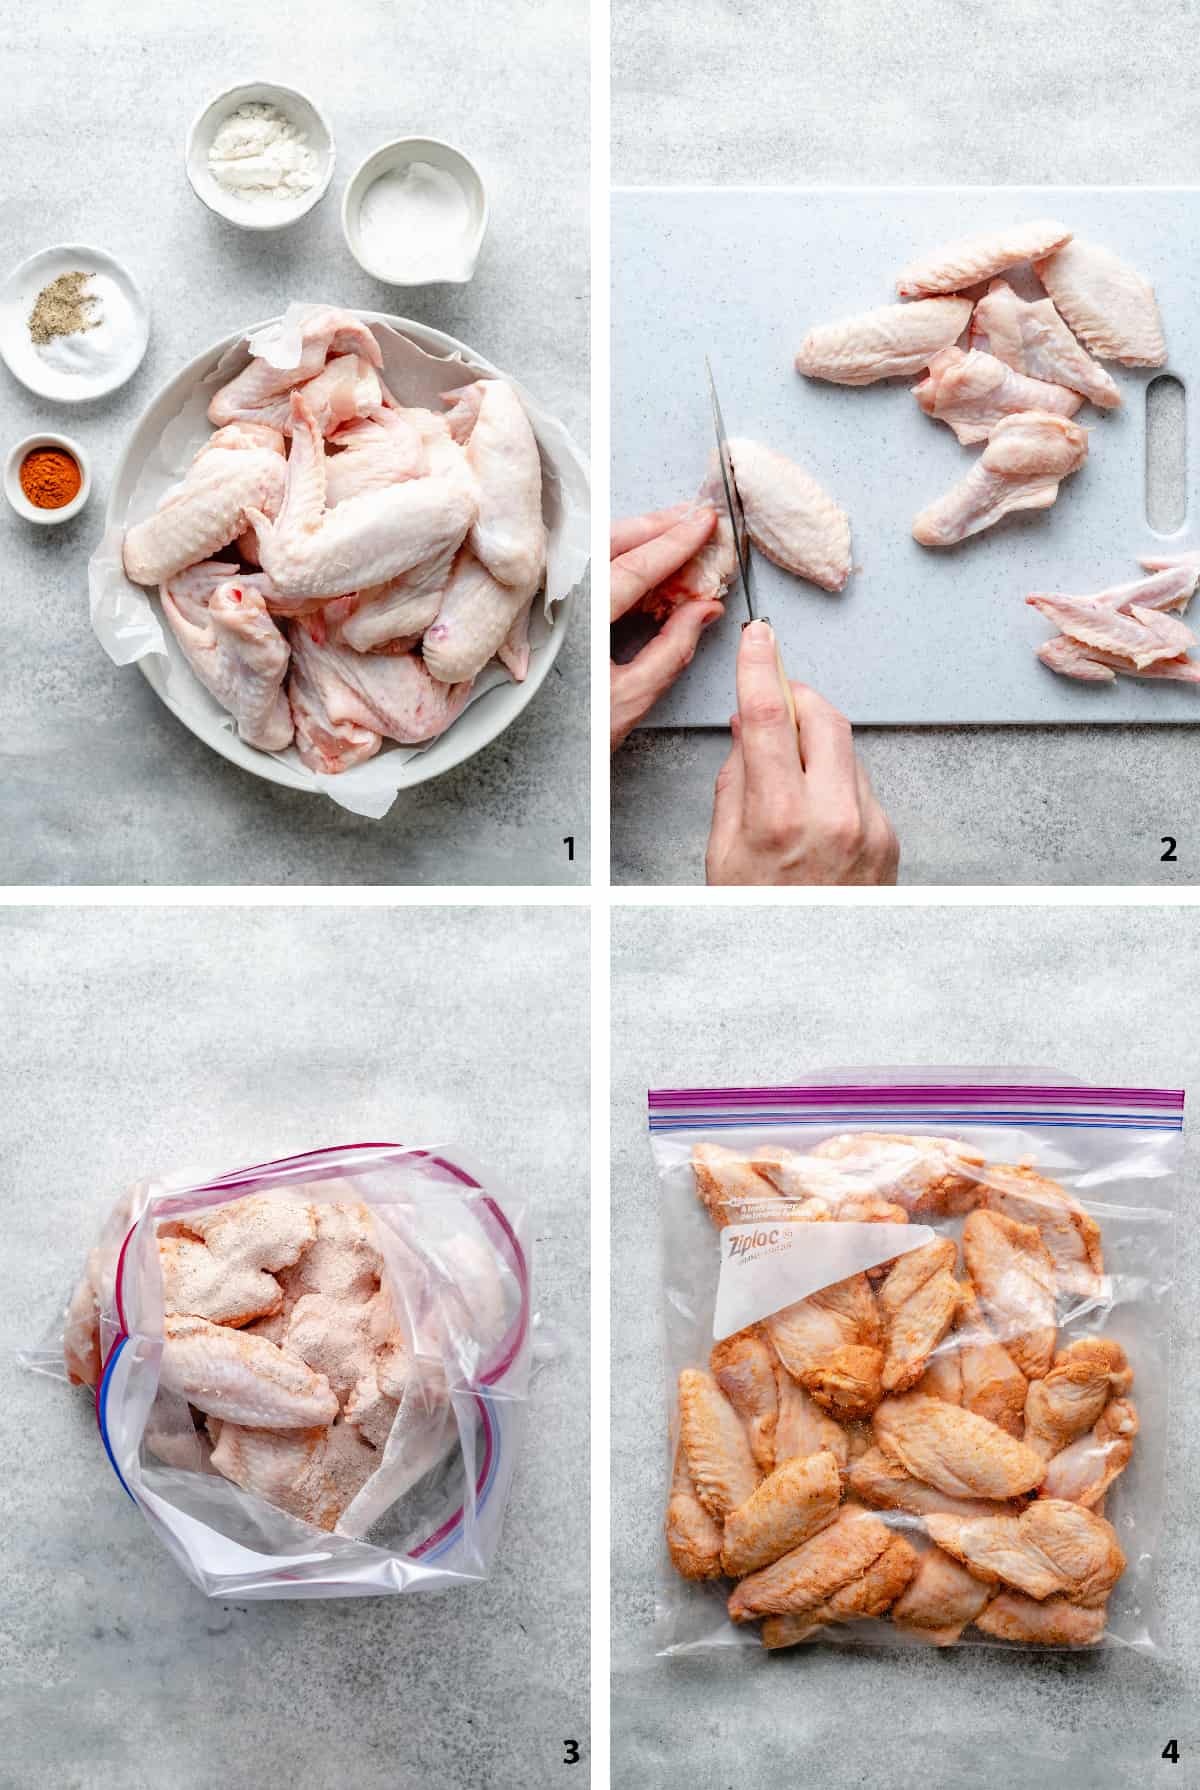 Process of ingredients, preparing the chicken wings and coating them in spices, baking powder & rice flour in a freezer bag.